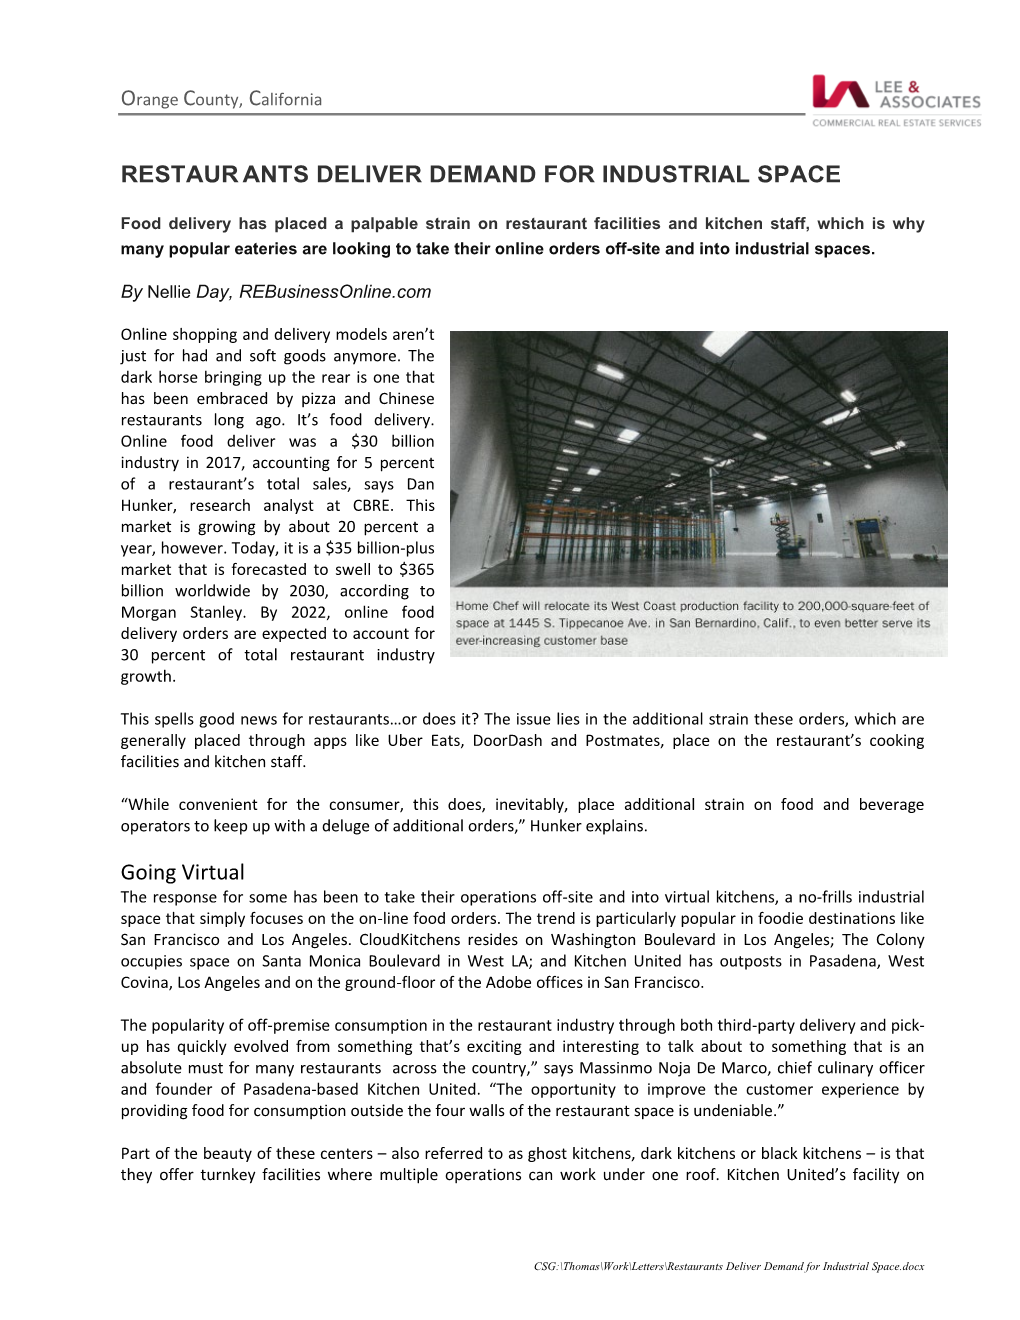 RESTAUR ANTS DELIVER DEMAND for INDUSTRIAL SPACE Going Virtual